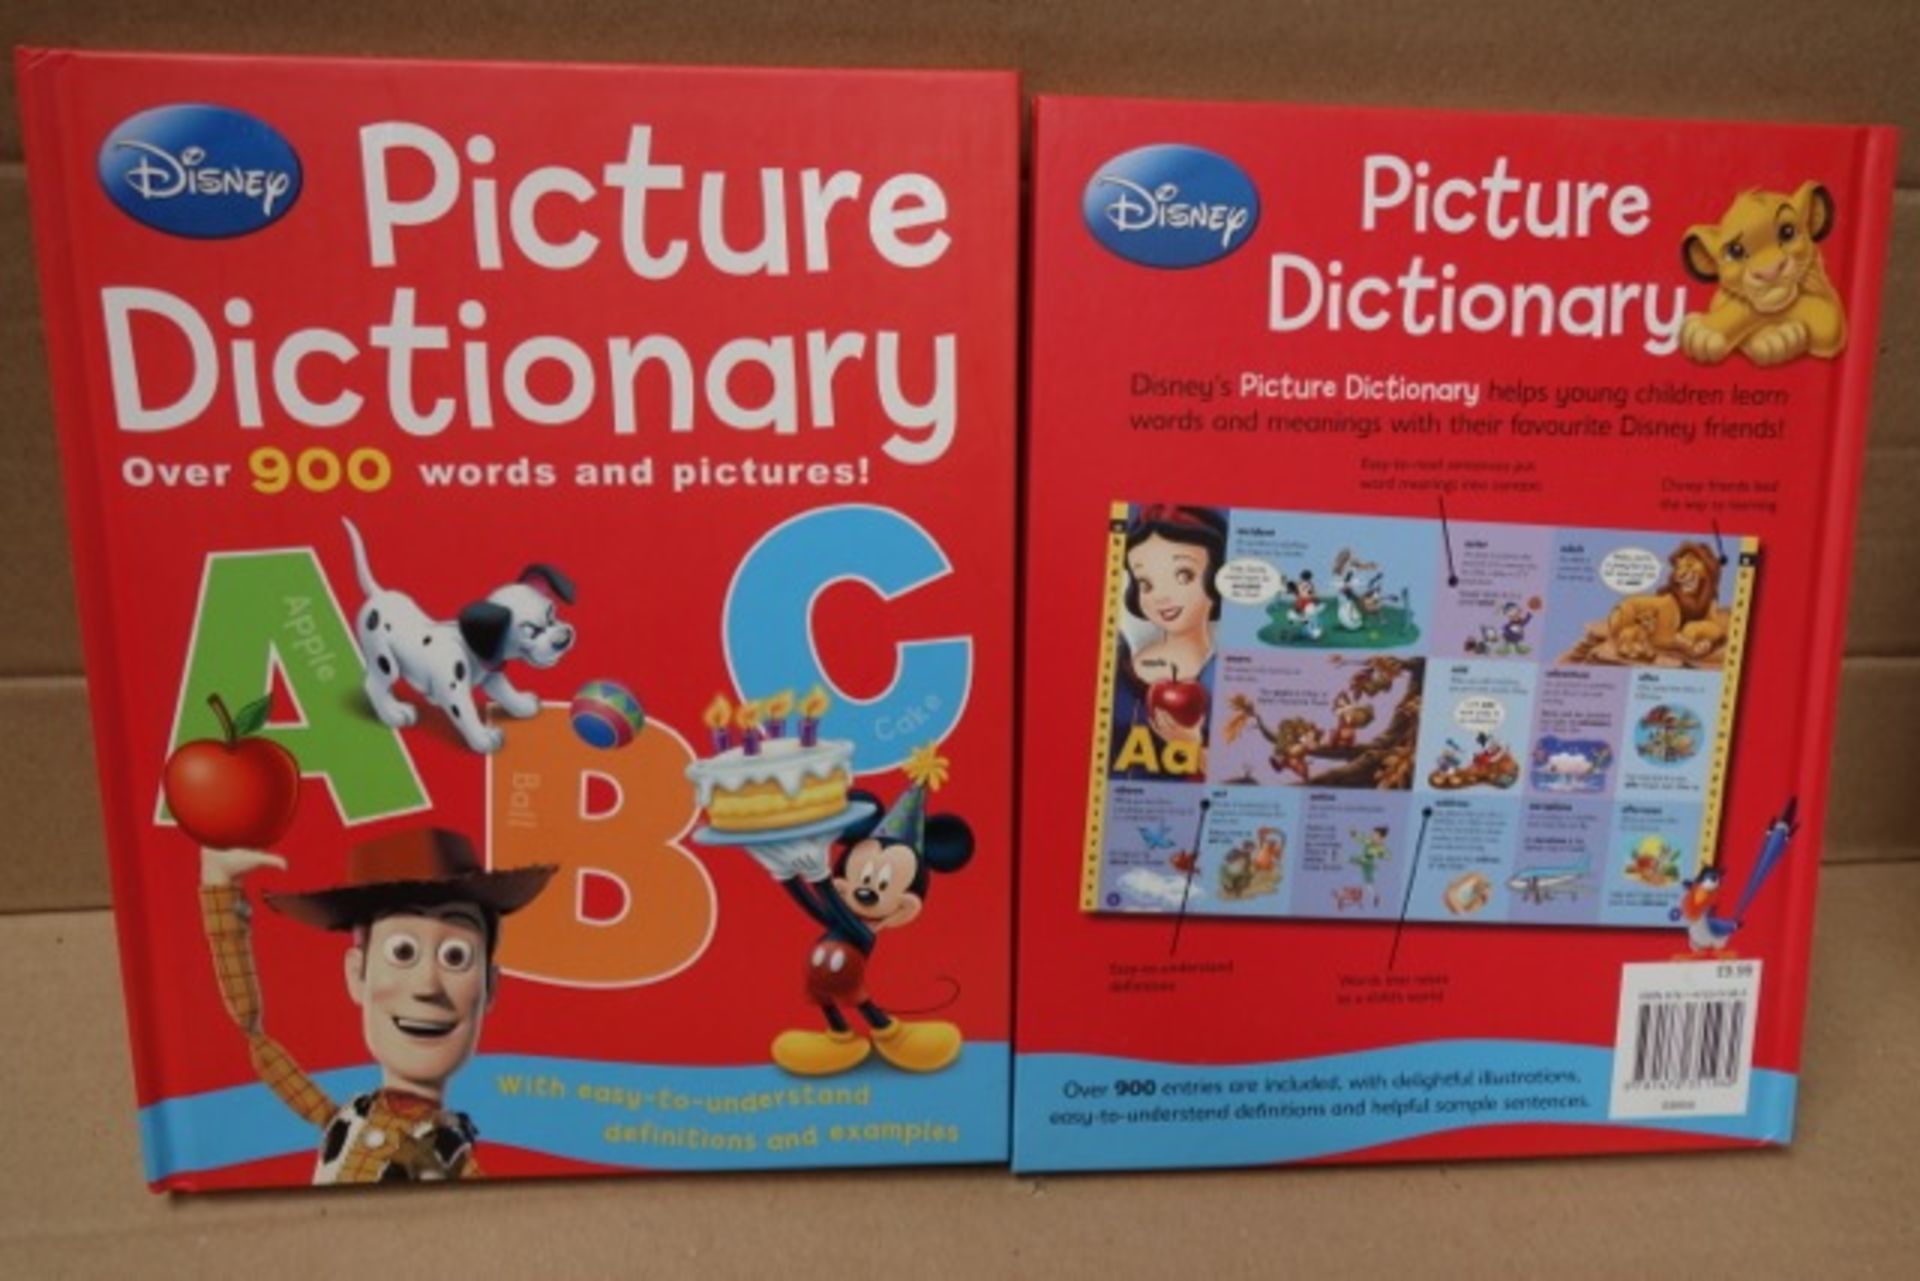 60 x Disney Picture Dictionary. Over 900 words & pictures. Disney's picture dictionary helps young